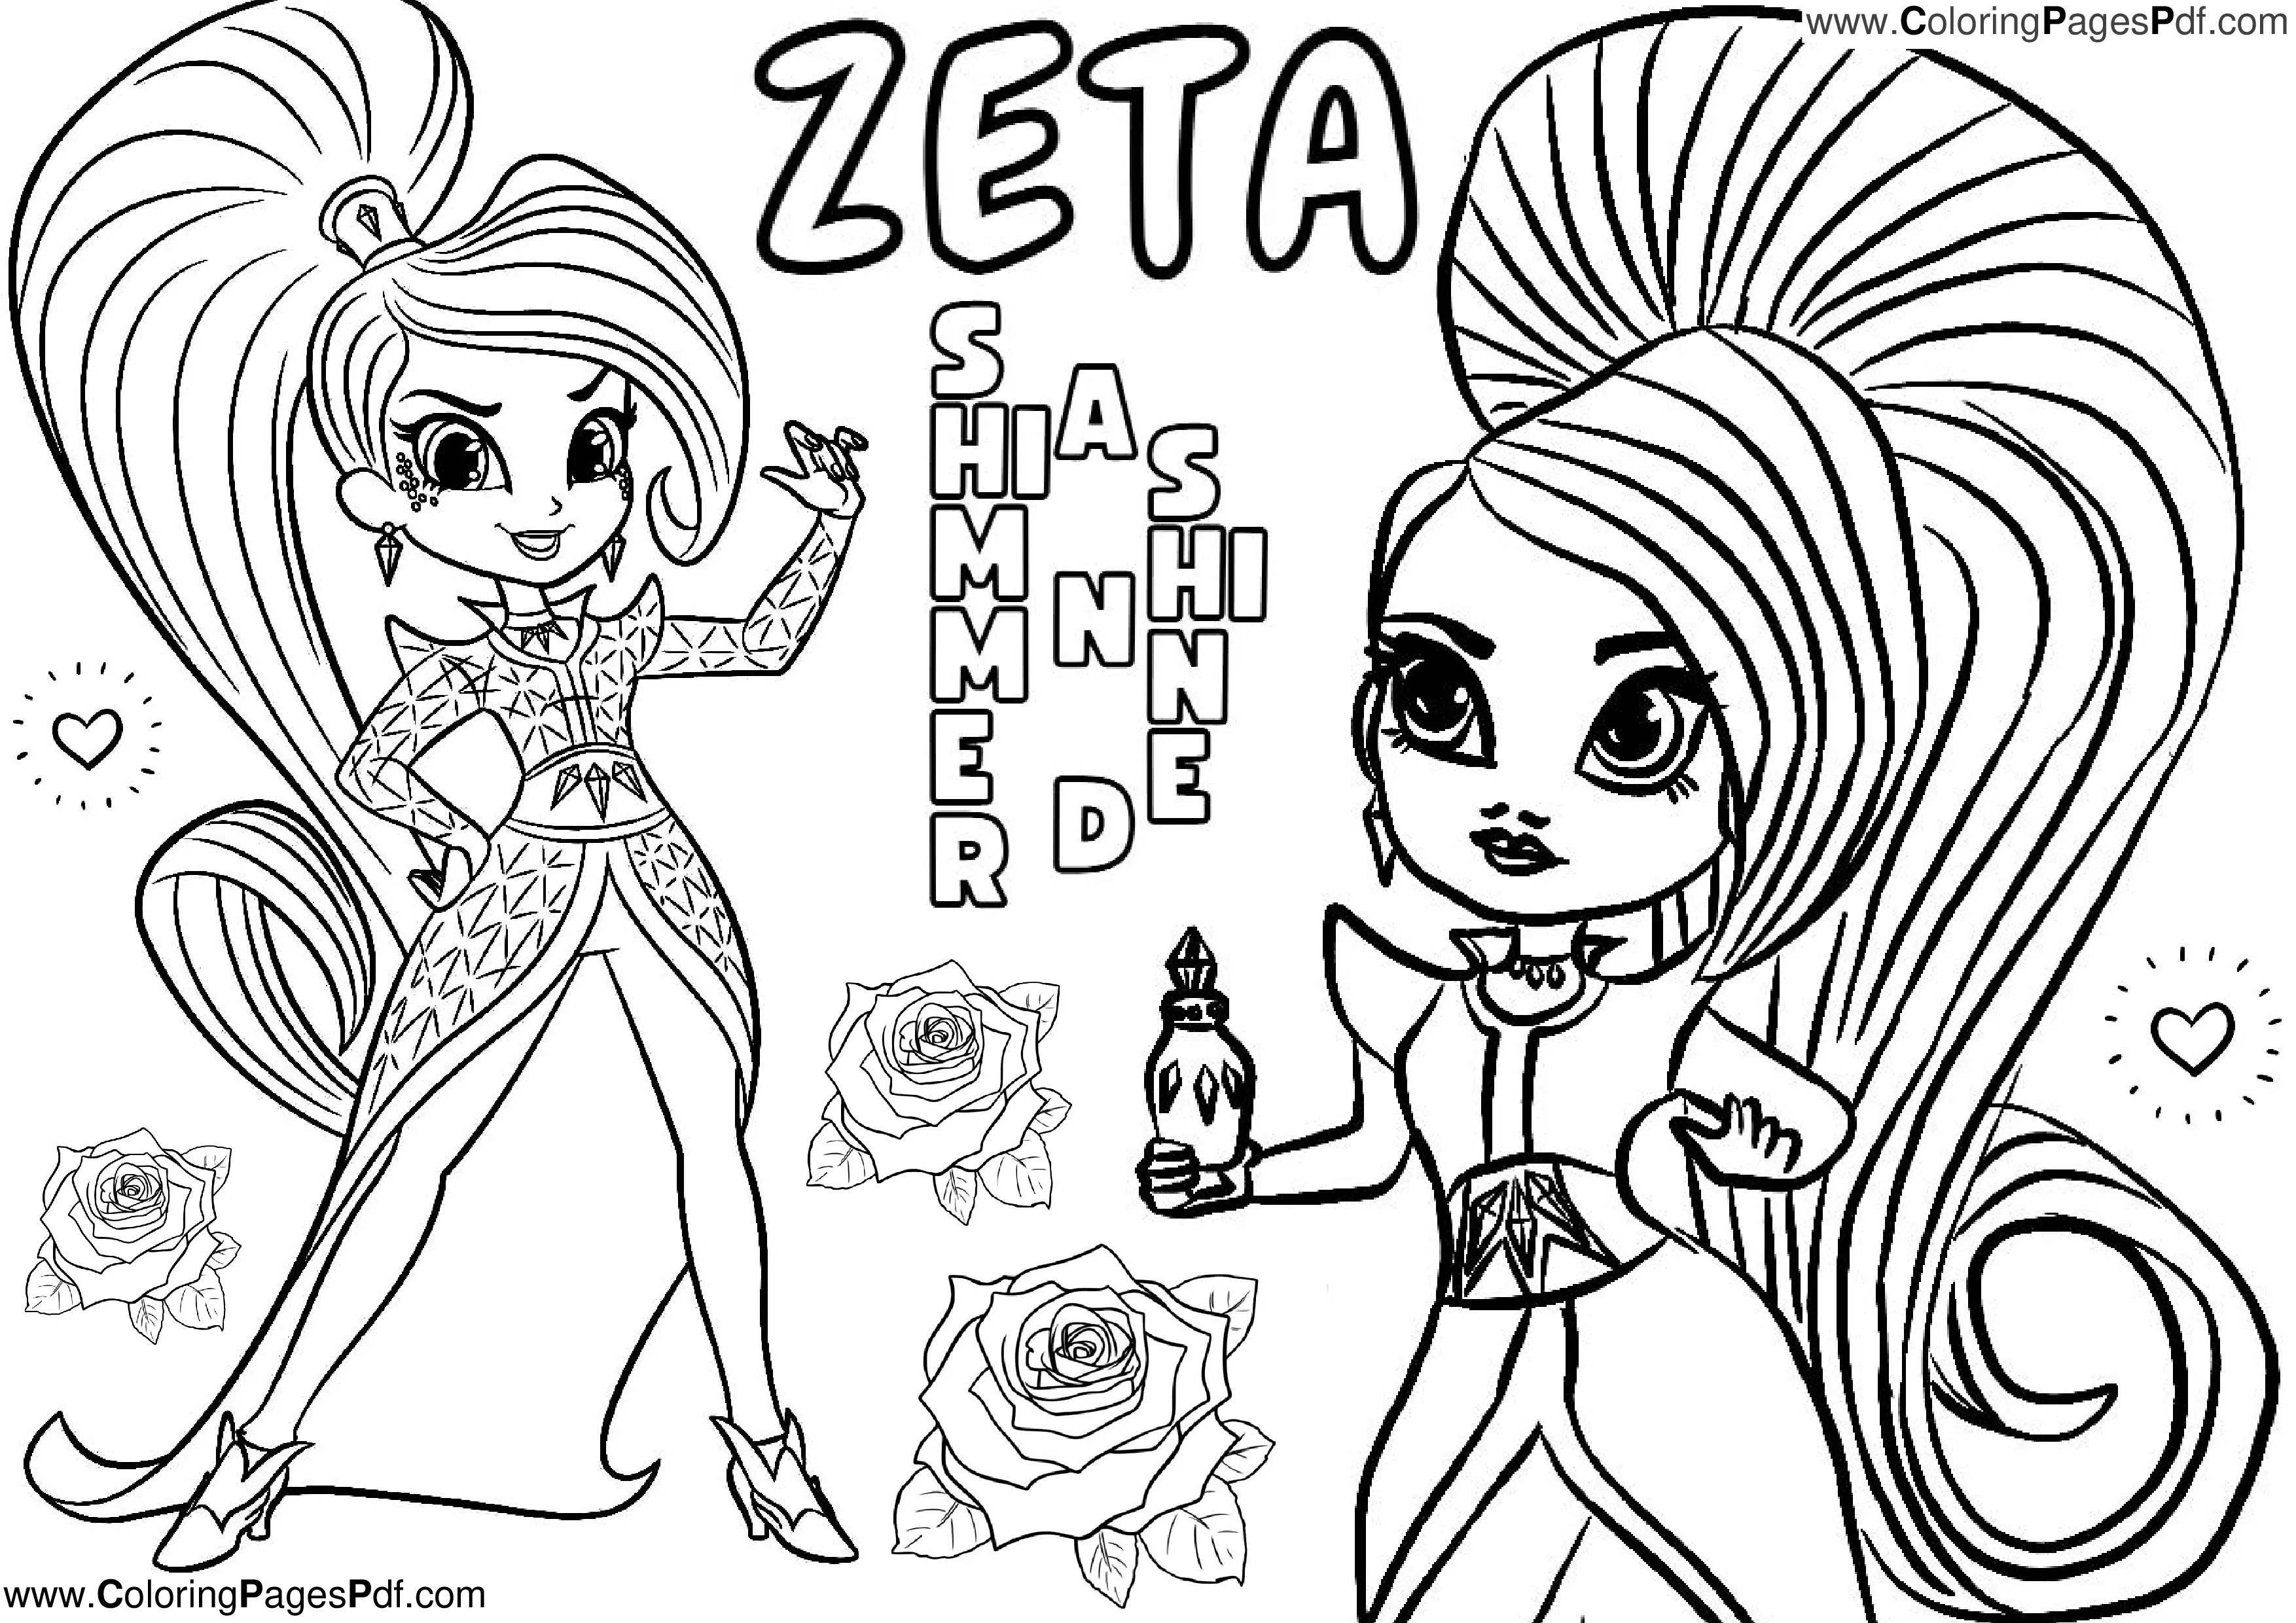 Zeta shimmer and shine coloring pages